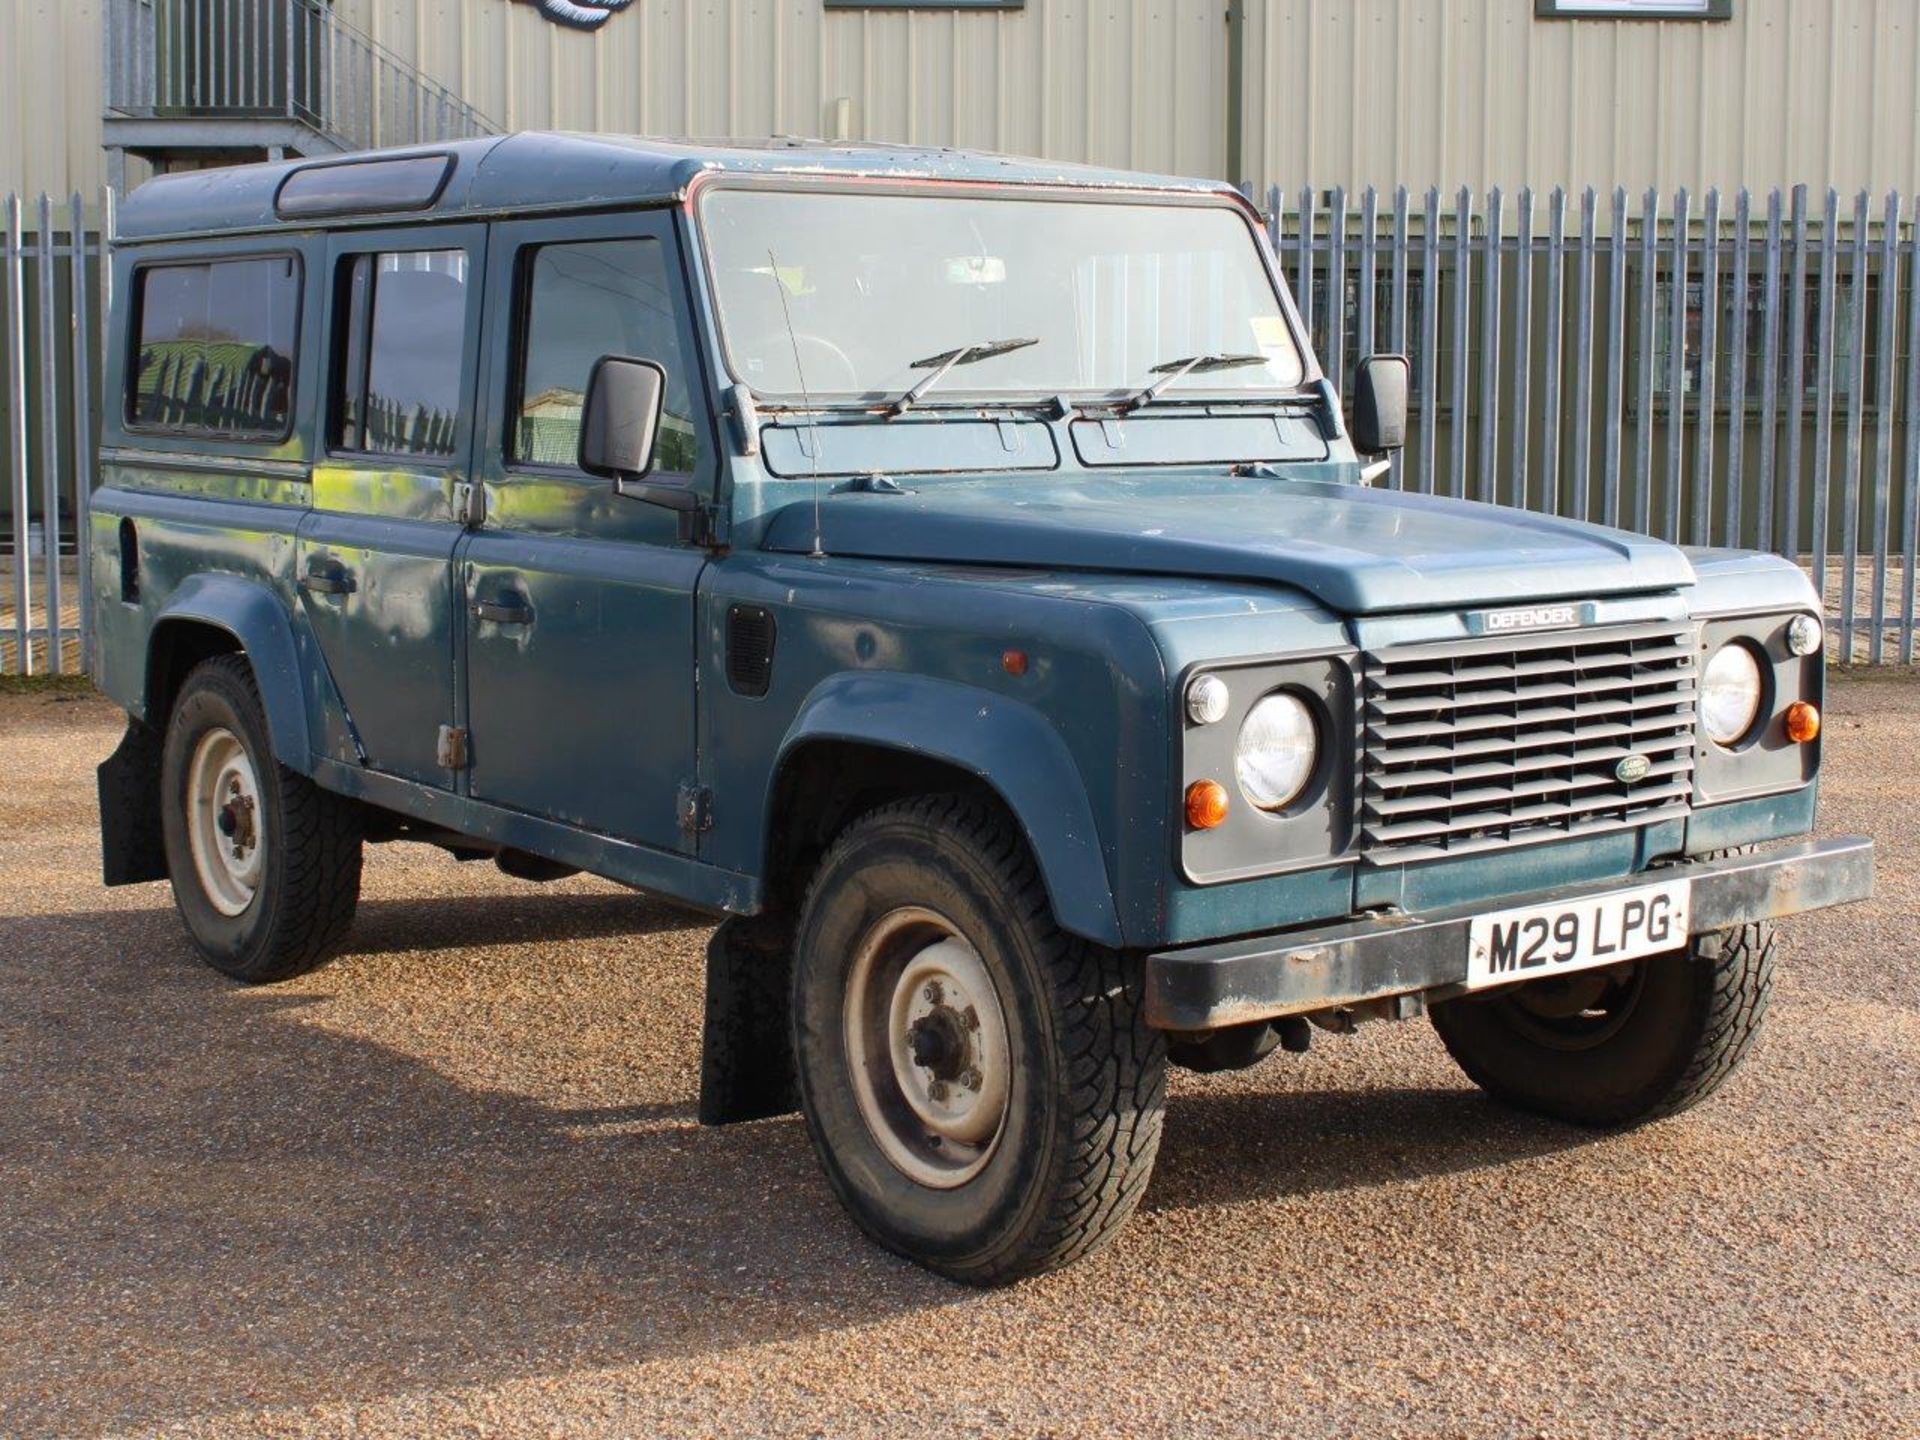 1995 Land Rover Defender 110 County Station Wagon TDi - Image 6 of 29